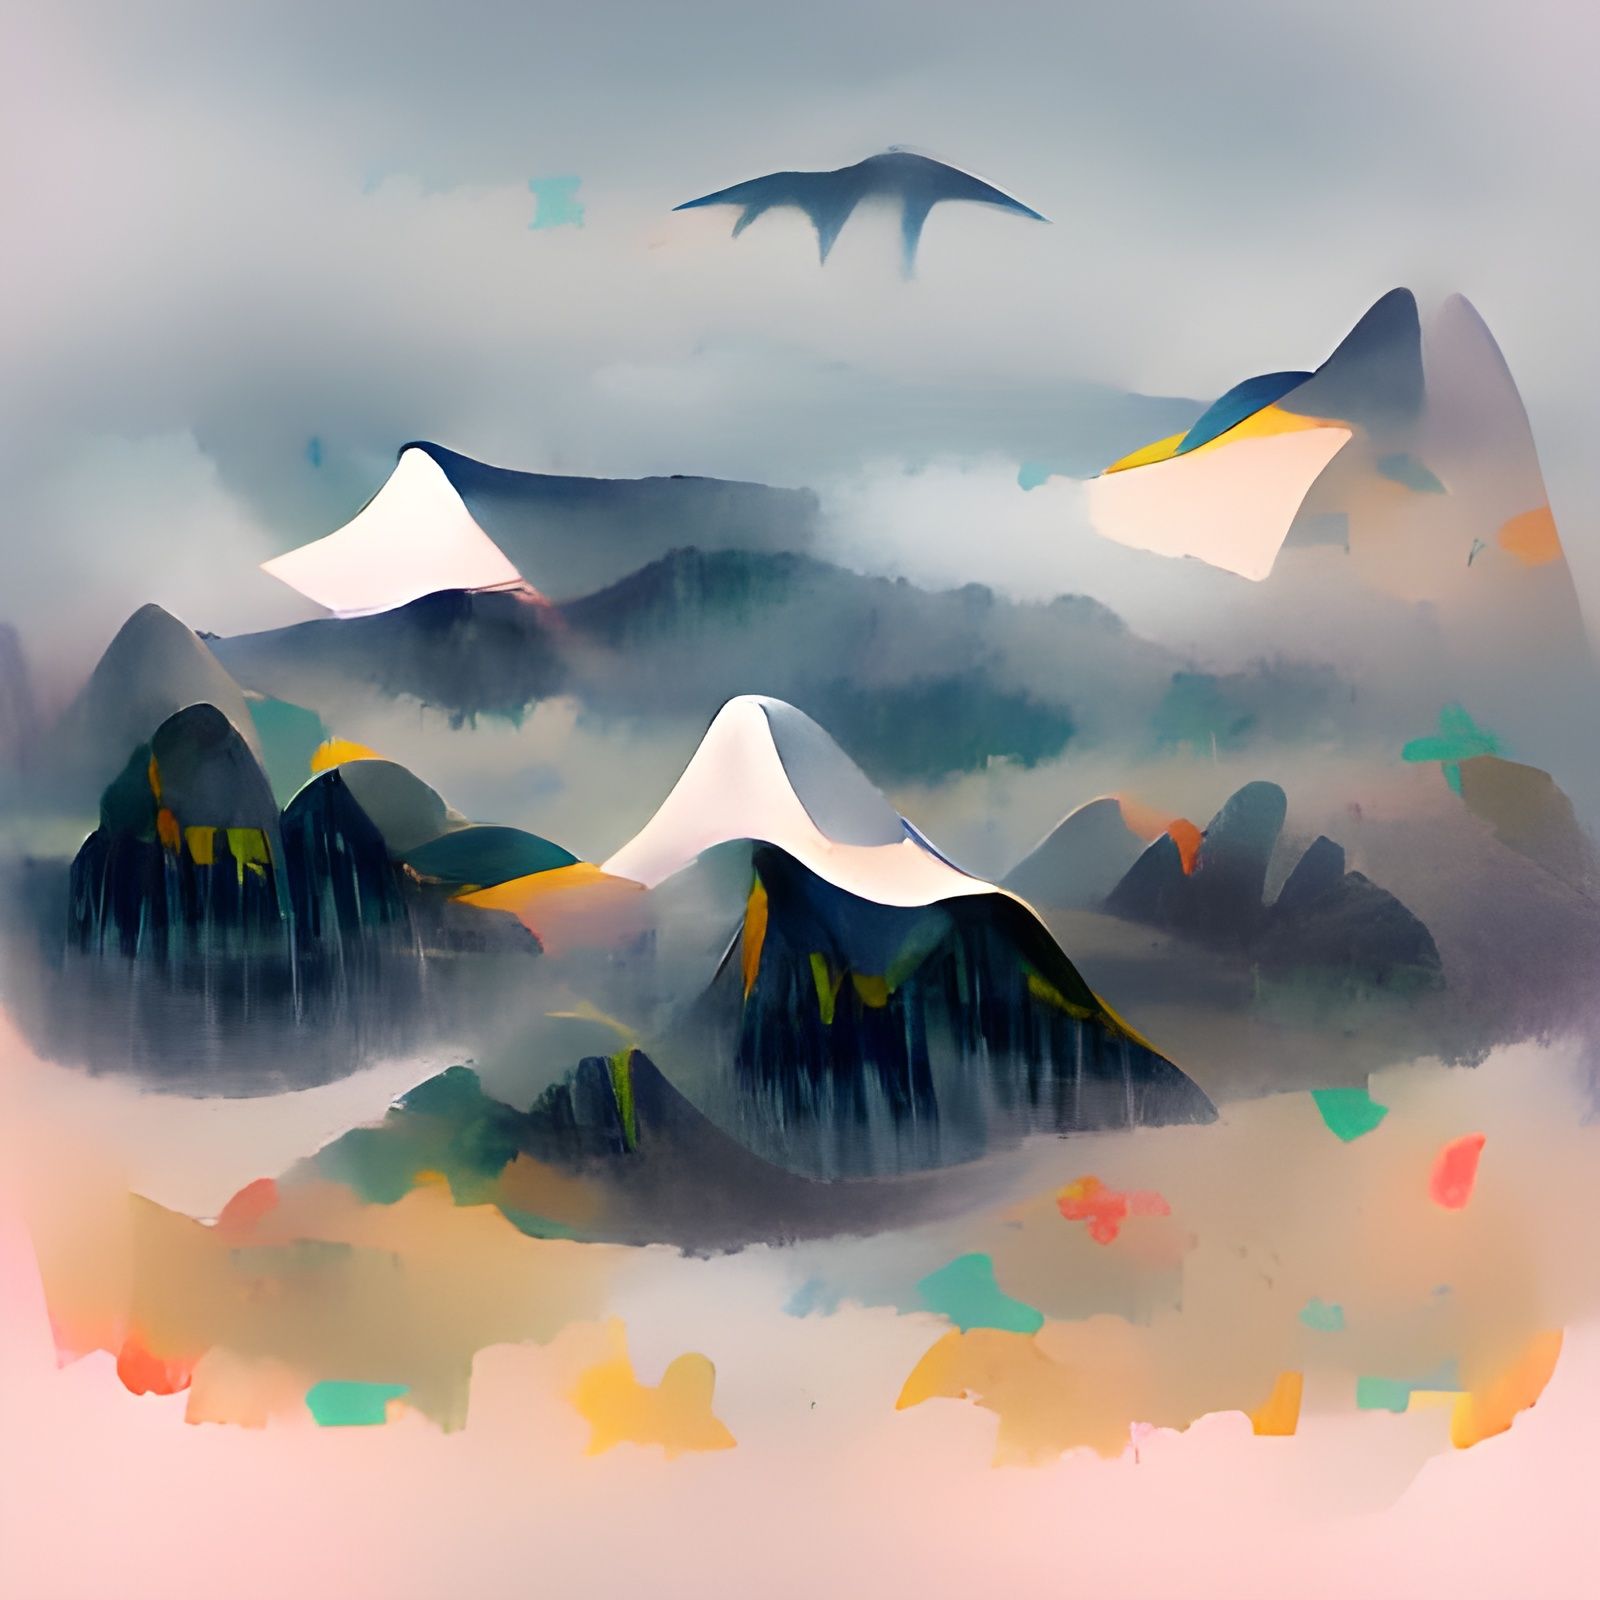 The misty mountains 